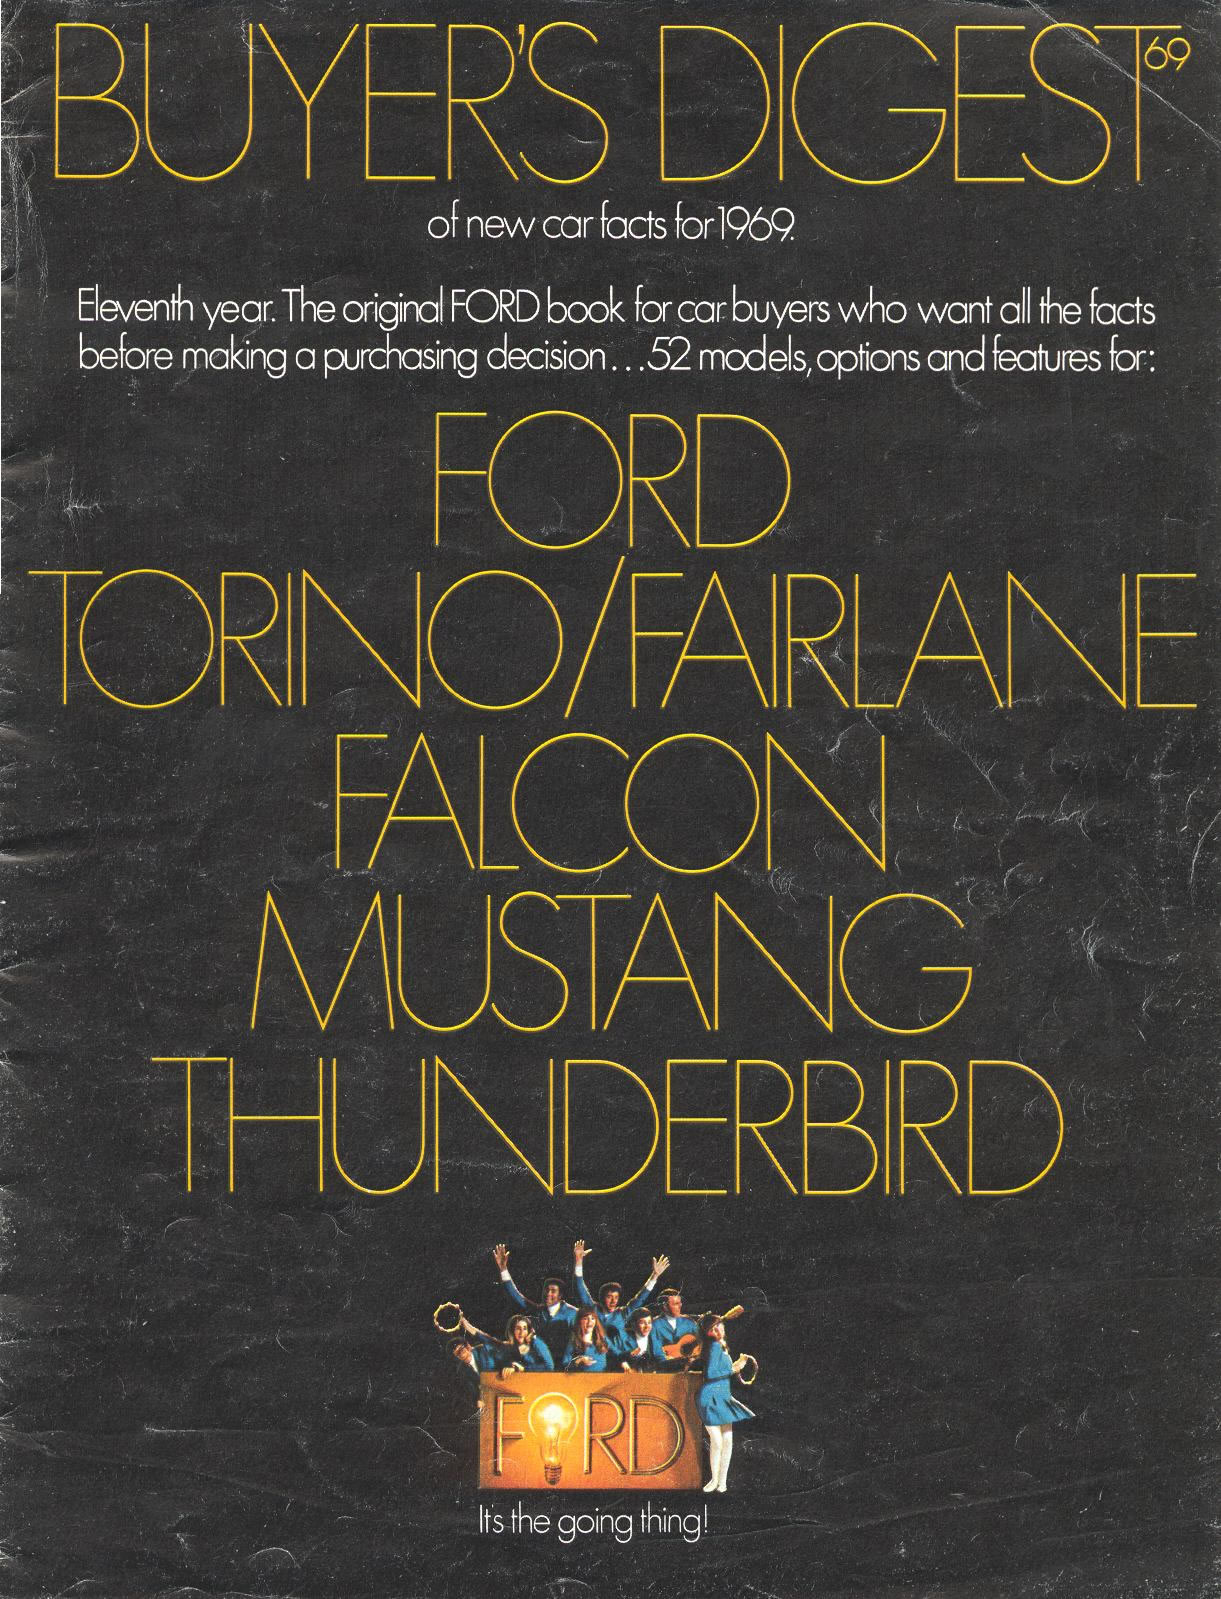 1969 Ford Buyers Digest